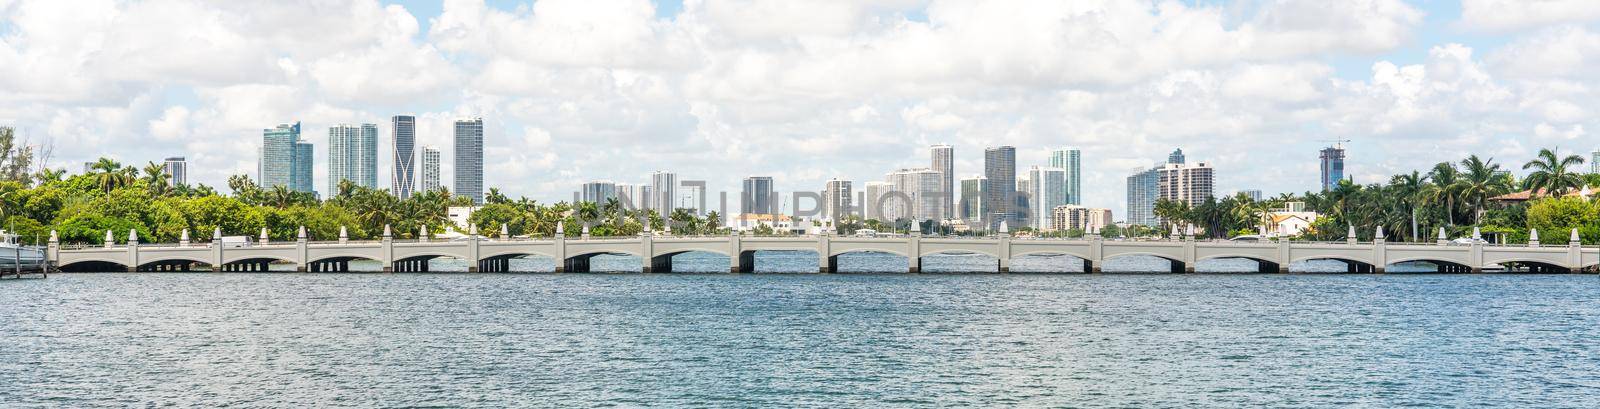 Miami skyline with skyscrapers and bridge over sea by Mariakray